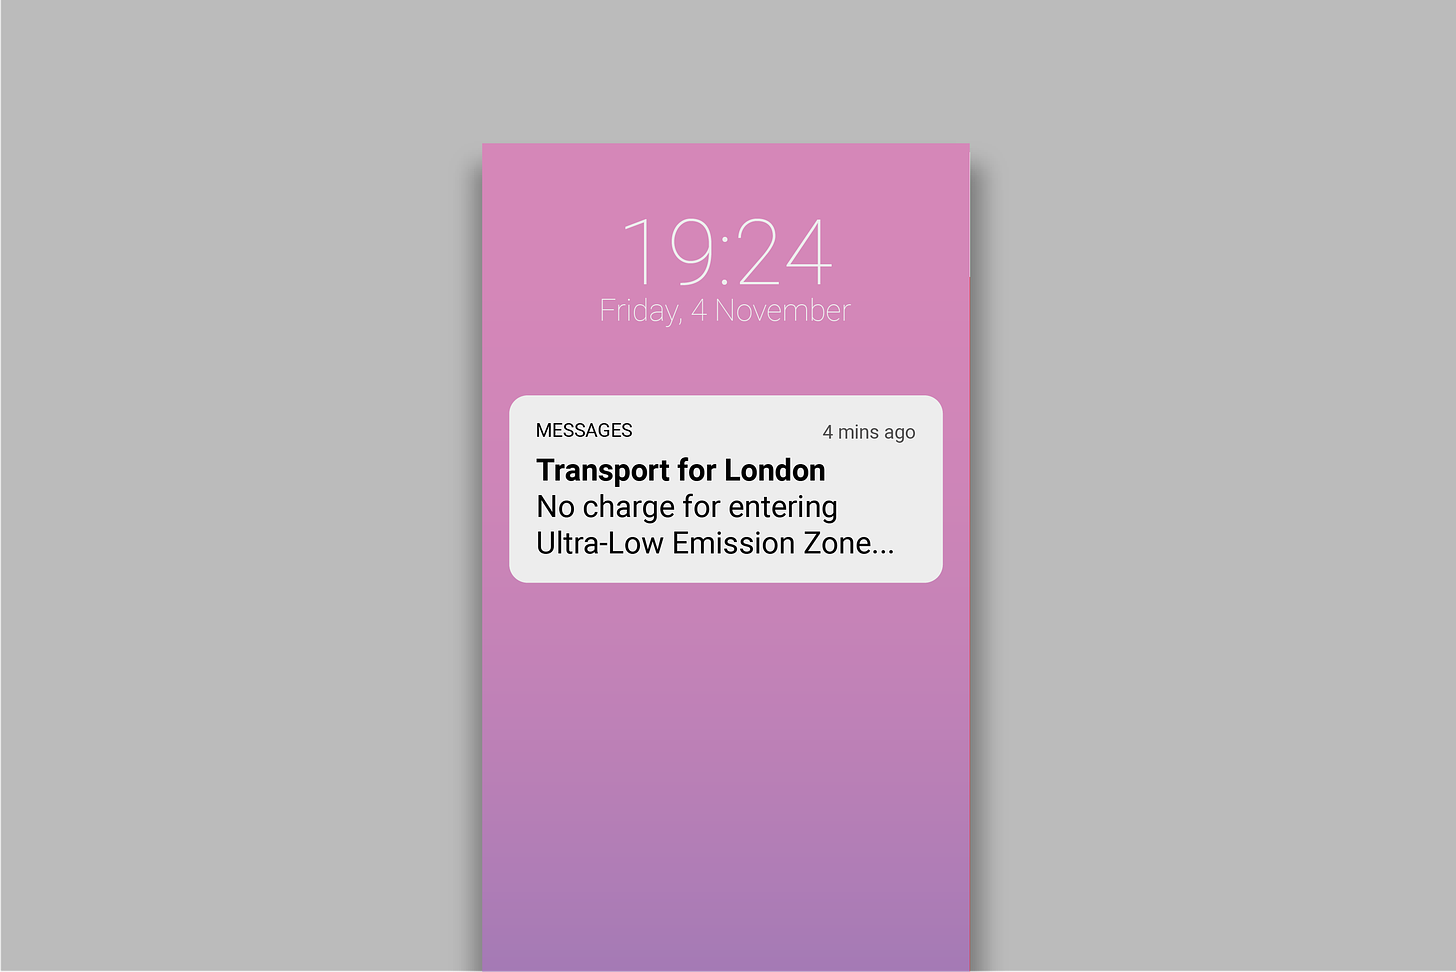 Text messaged on phone screen reading 'Transport for London. No charge for entering Ultra-Low Emission Zone'